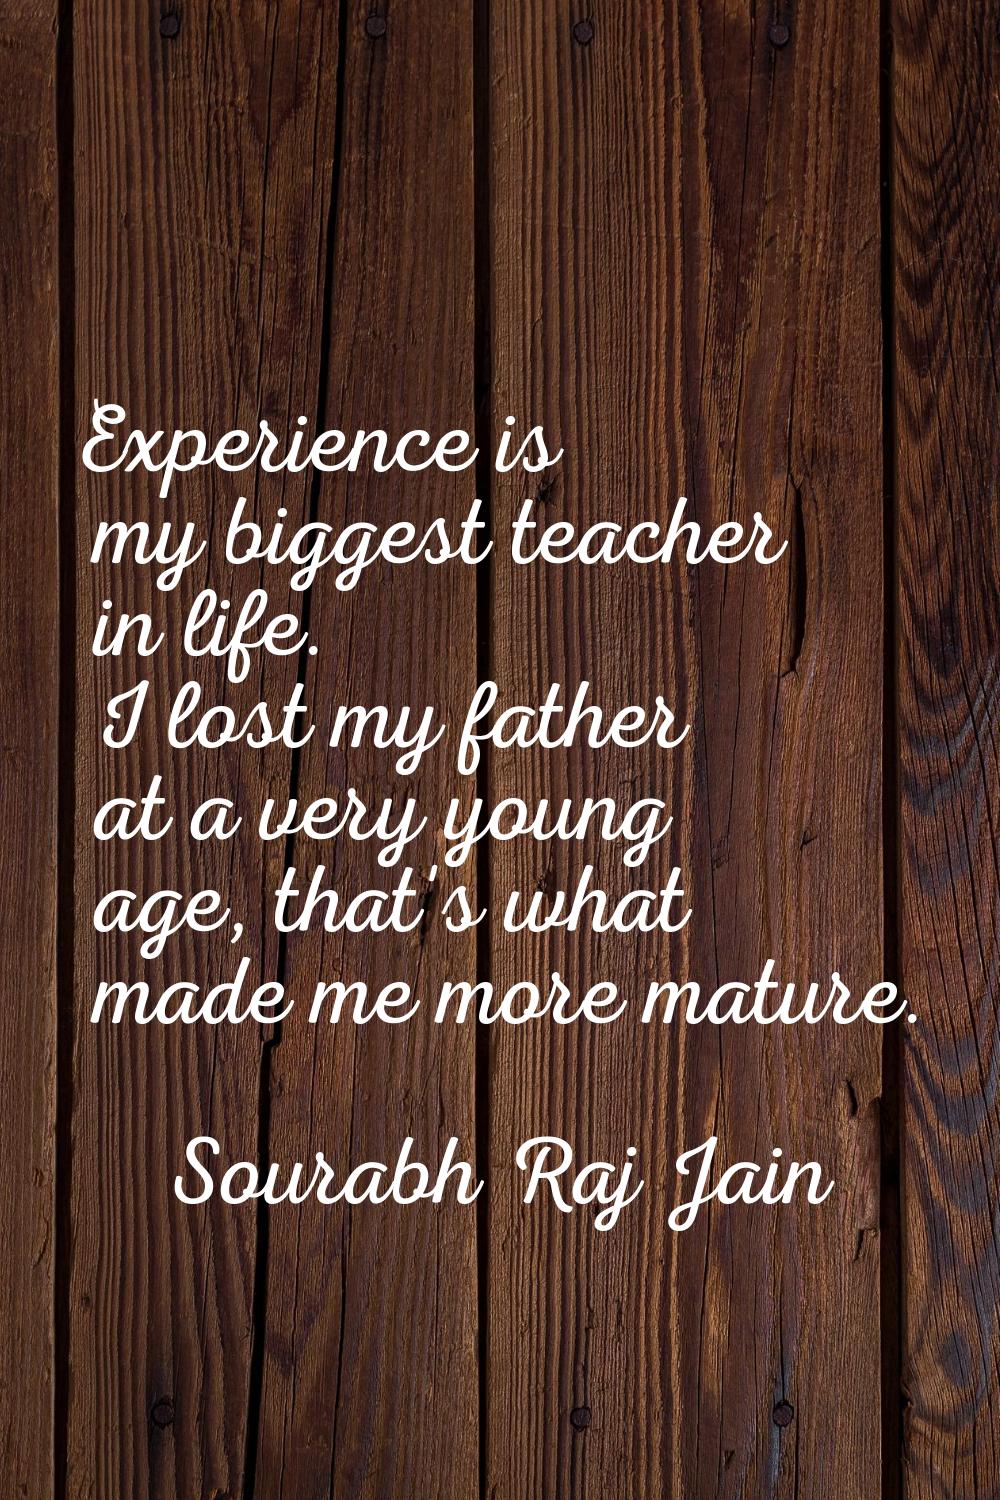 Experience is my biggest teacher in life. I lost my father at a very young age, that's what made me